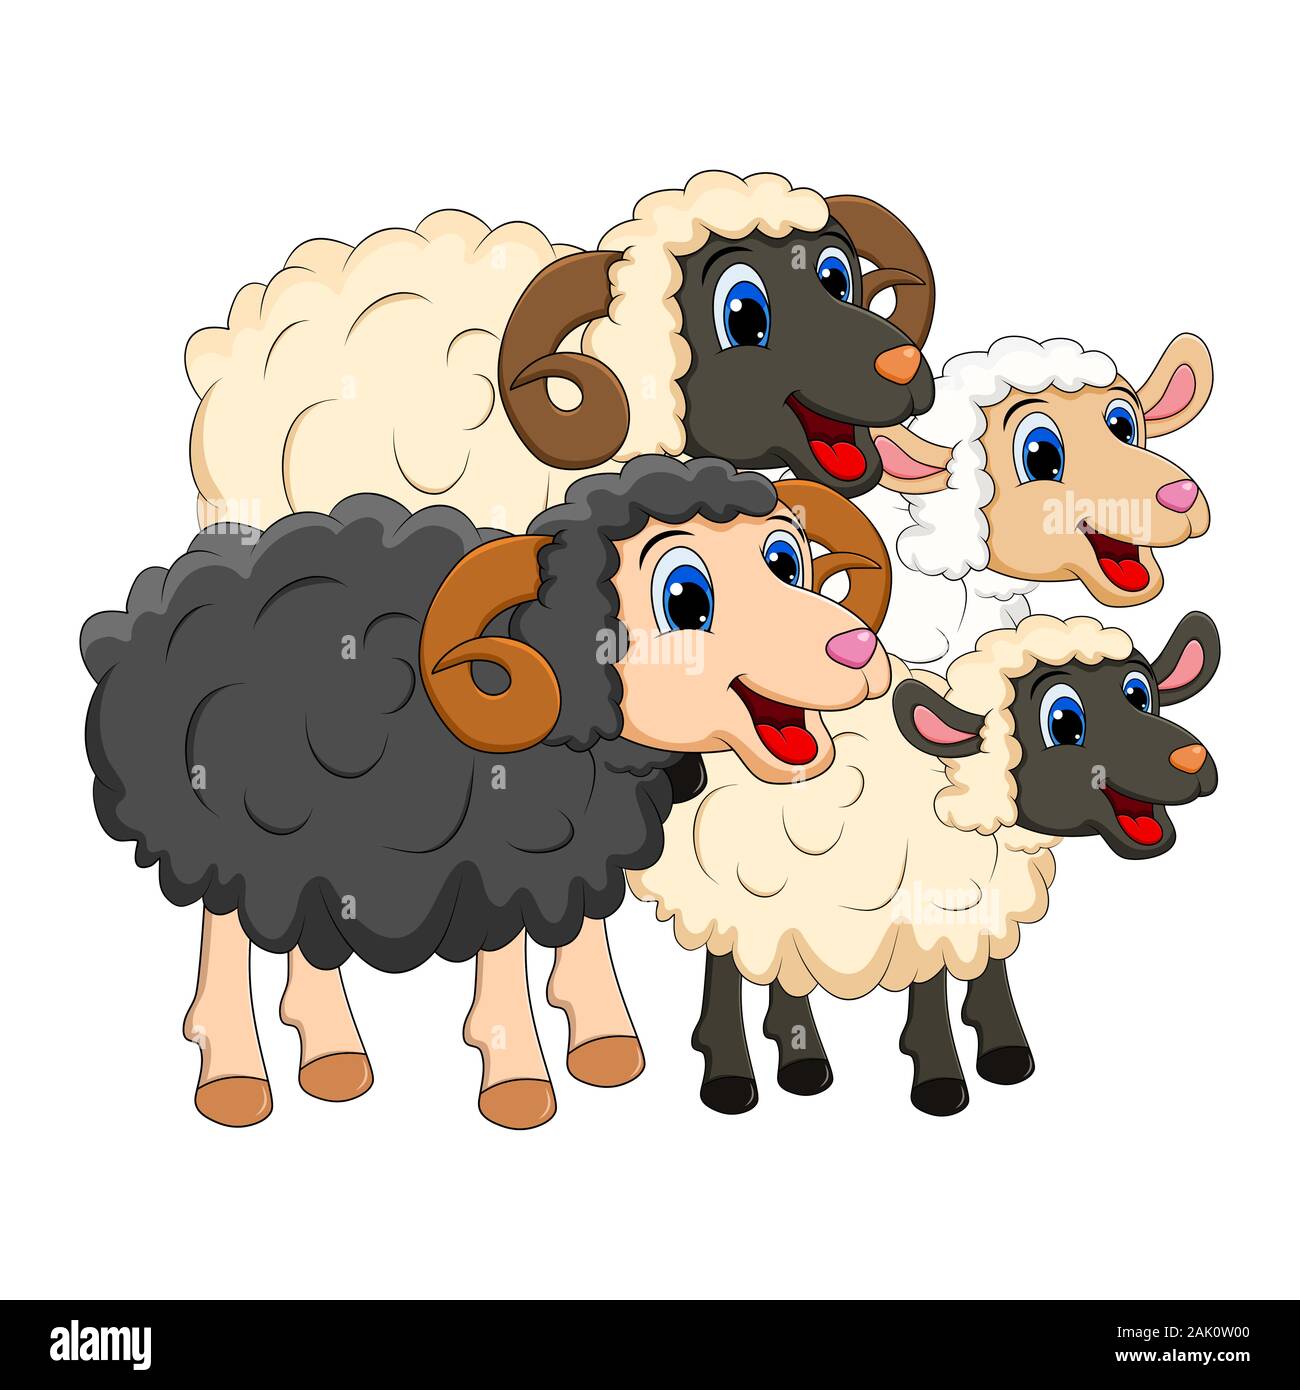 Farm animal group family. white  Sheep, lamb,  black ram   design isolated on white background. Cute cartoon animals collection Vector illustration Stock Vector